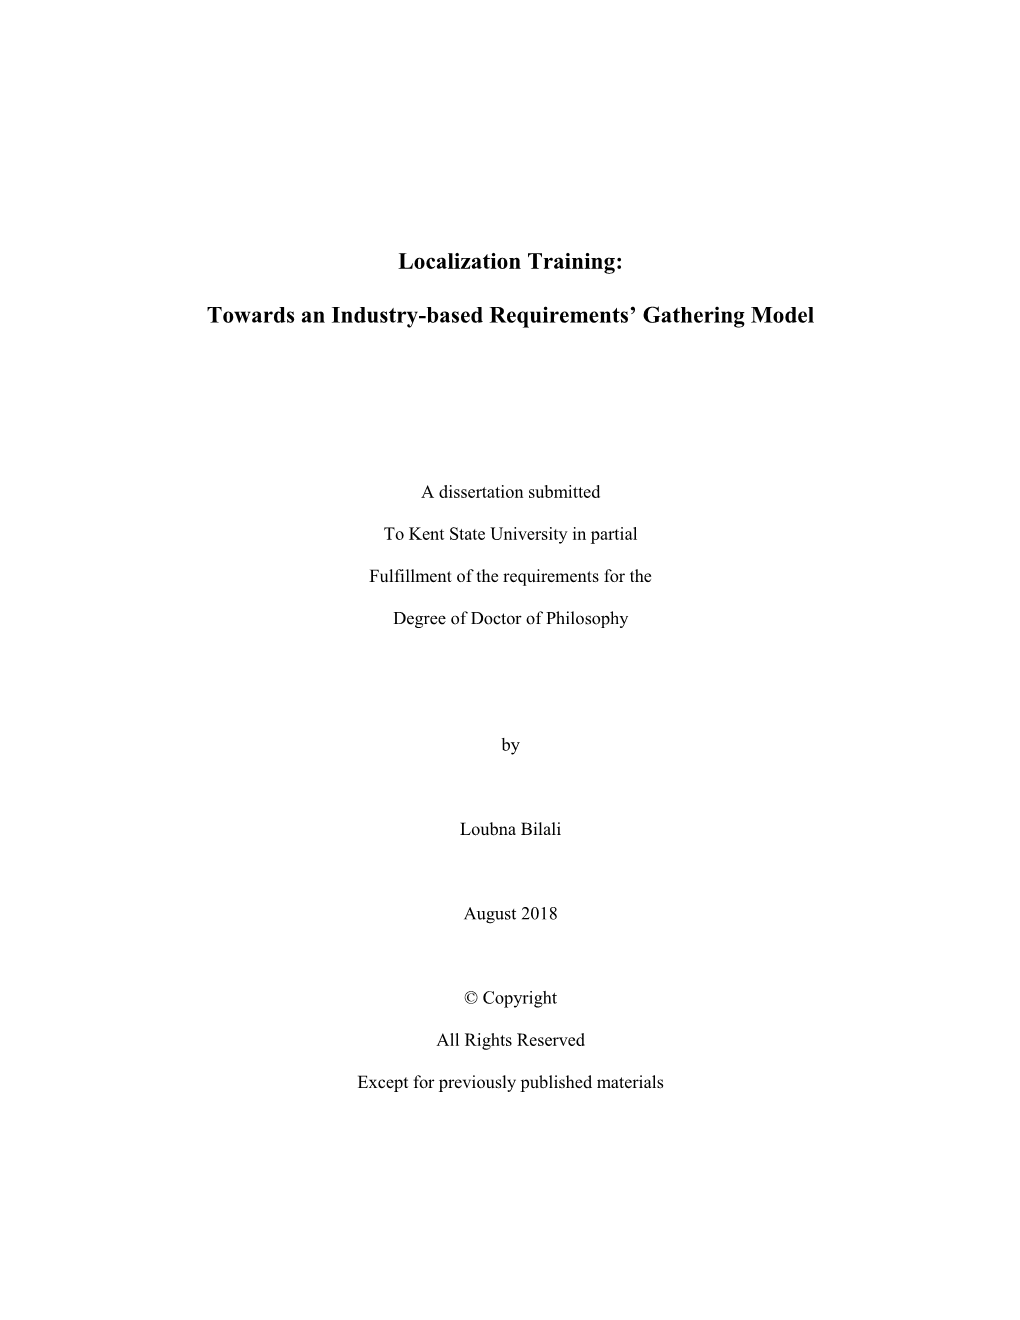 Localization Training: Towards an Industry-Based Requirements